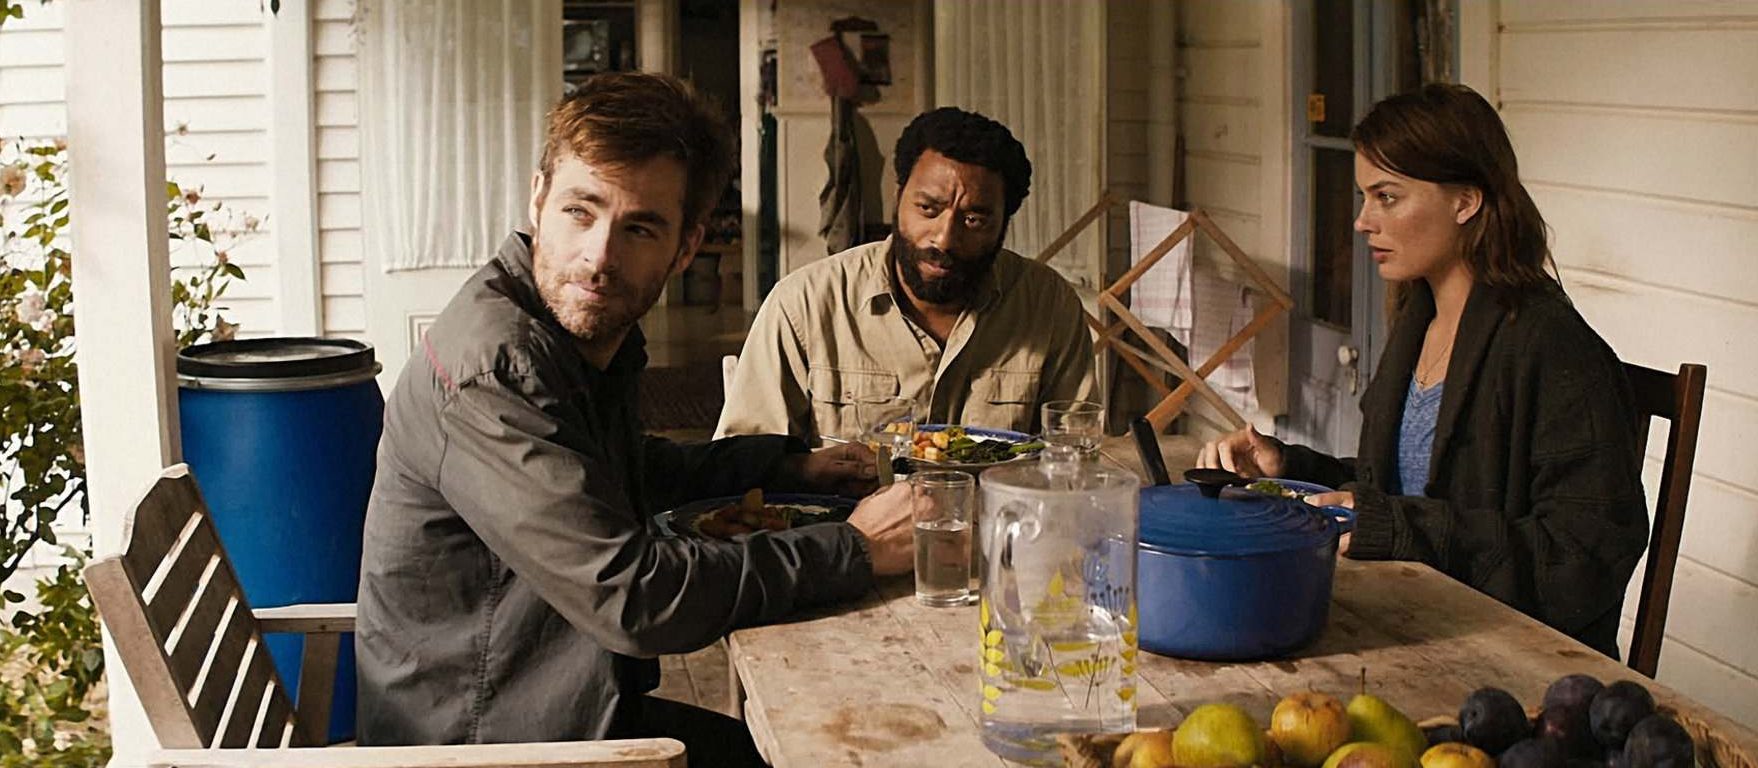 Margot Robbie, Chiwetel Ejiofor, and Chris Pine in Z for Zachariah